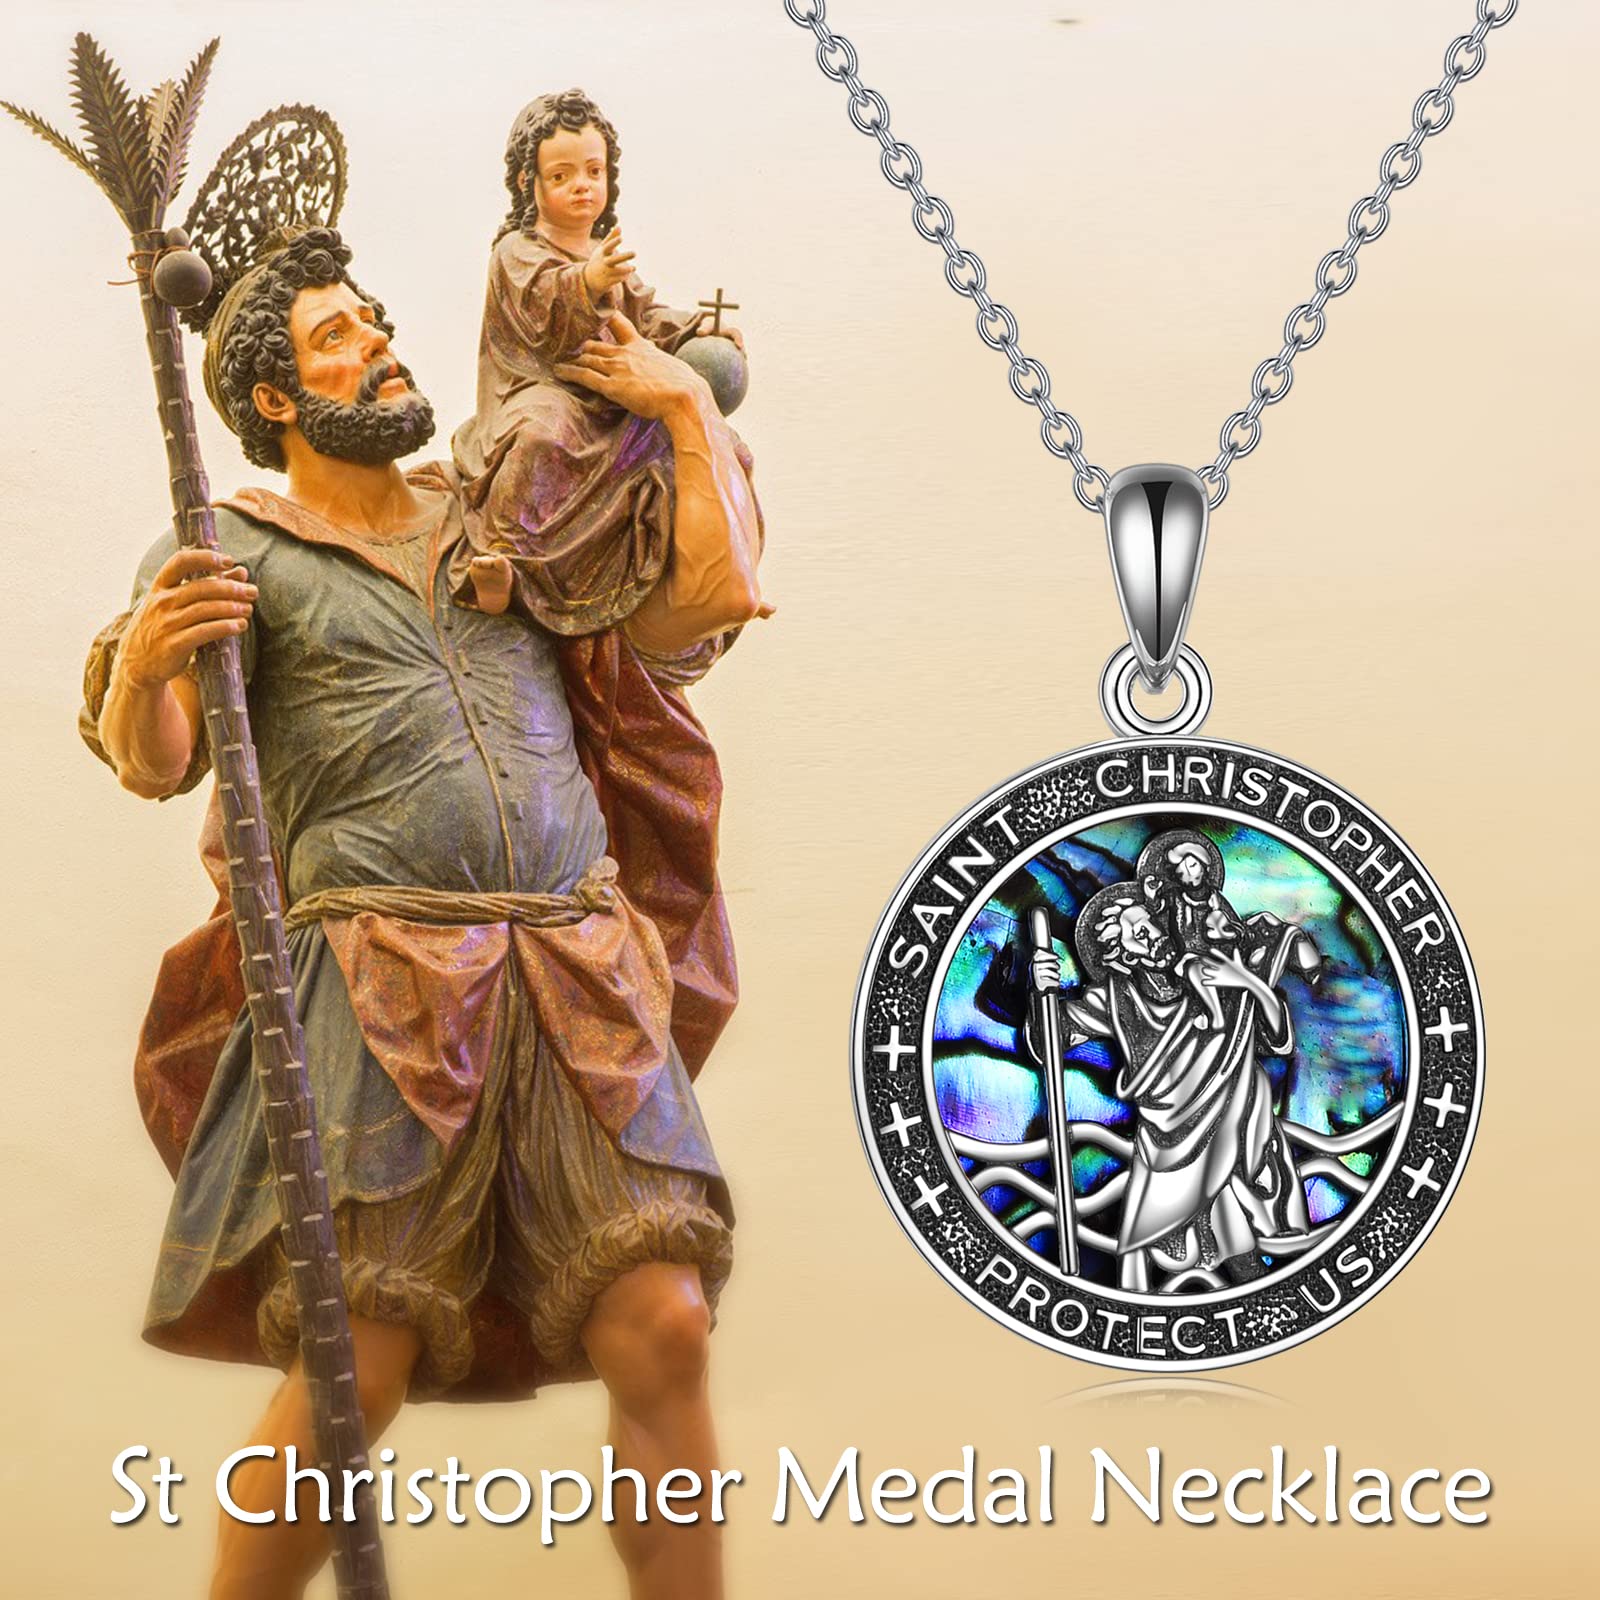 WTENIY Saint Christopher Necklace for Men Women, Sterling Silver St Christopher Medallion Travel Protection Pendant Necklace Jewelry